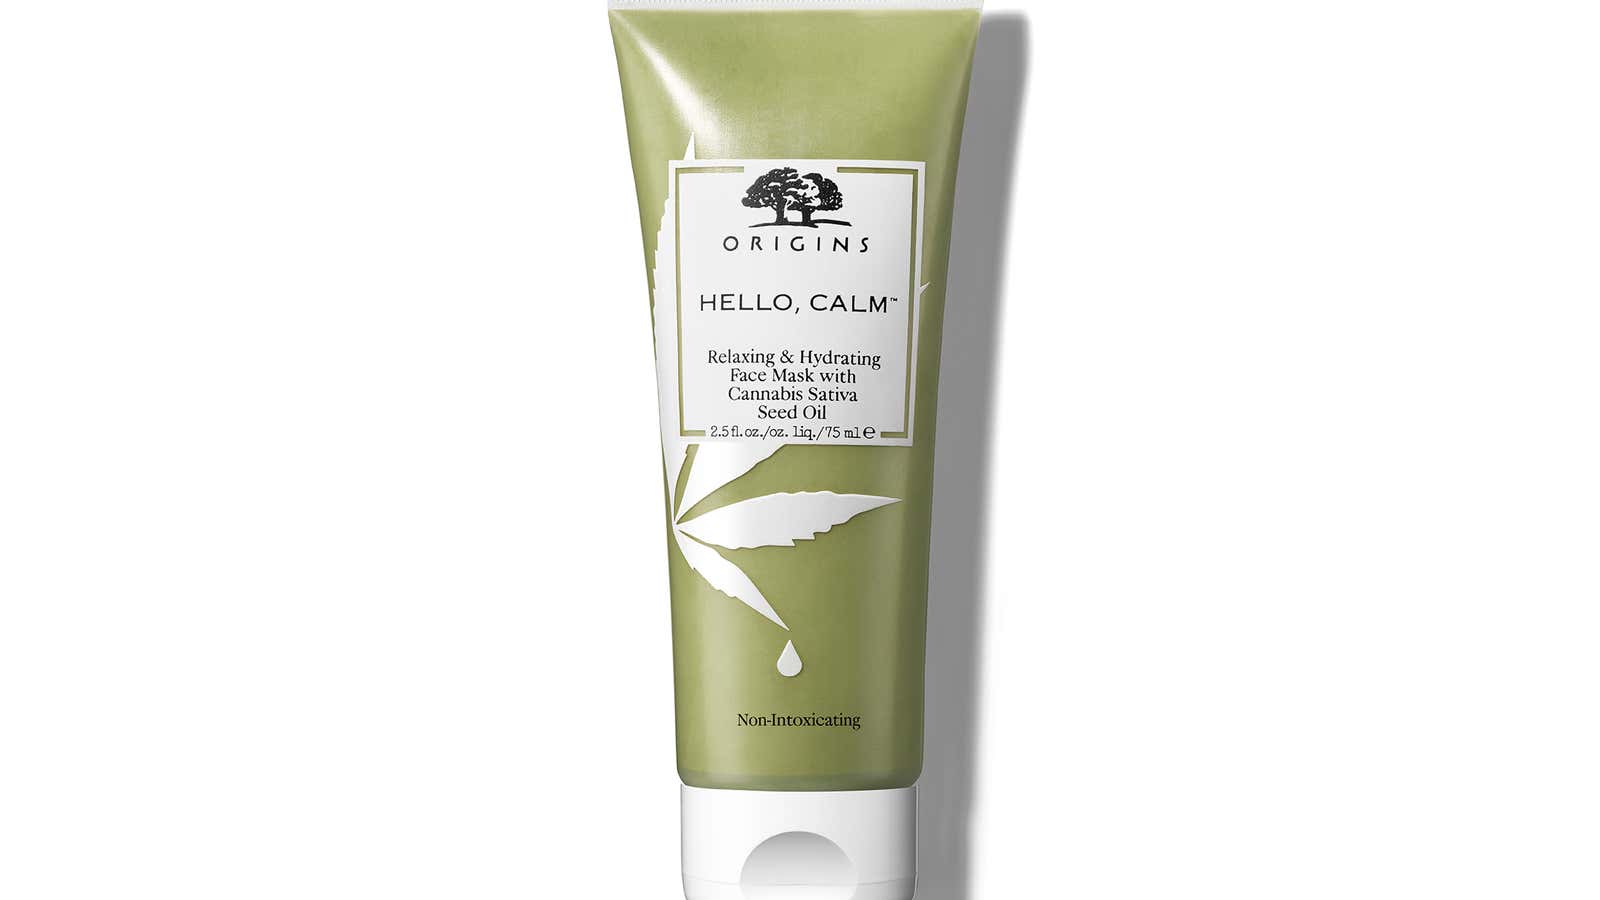 It’s the first prestige skincare brand to launch a cannabis product.